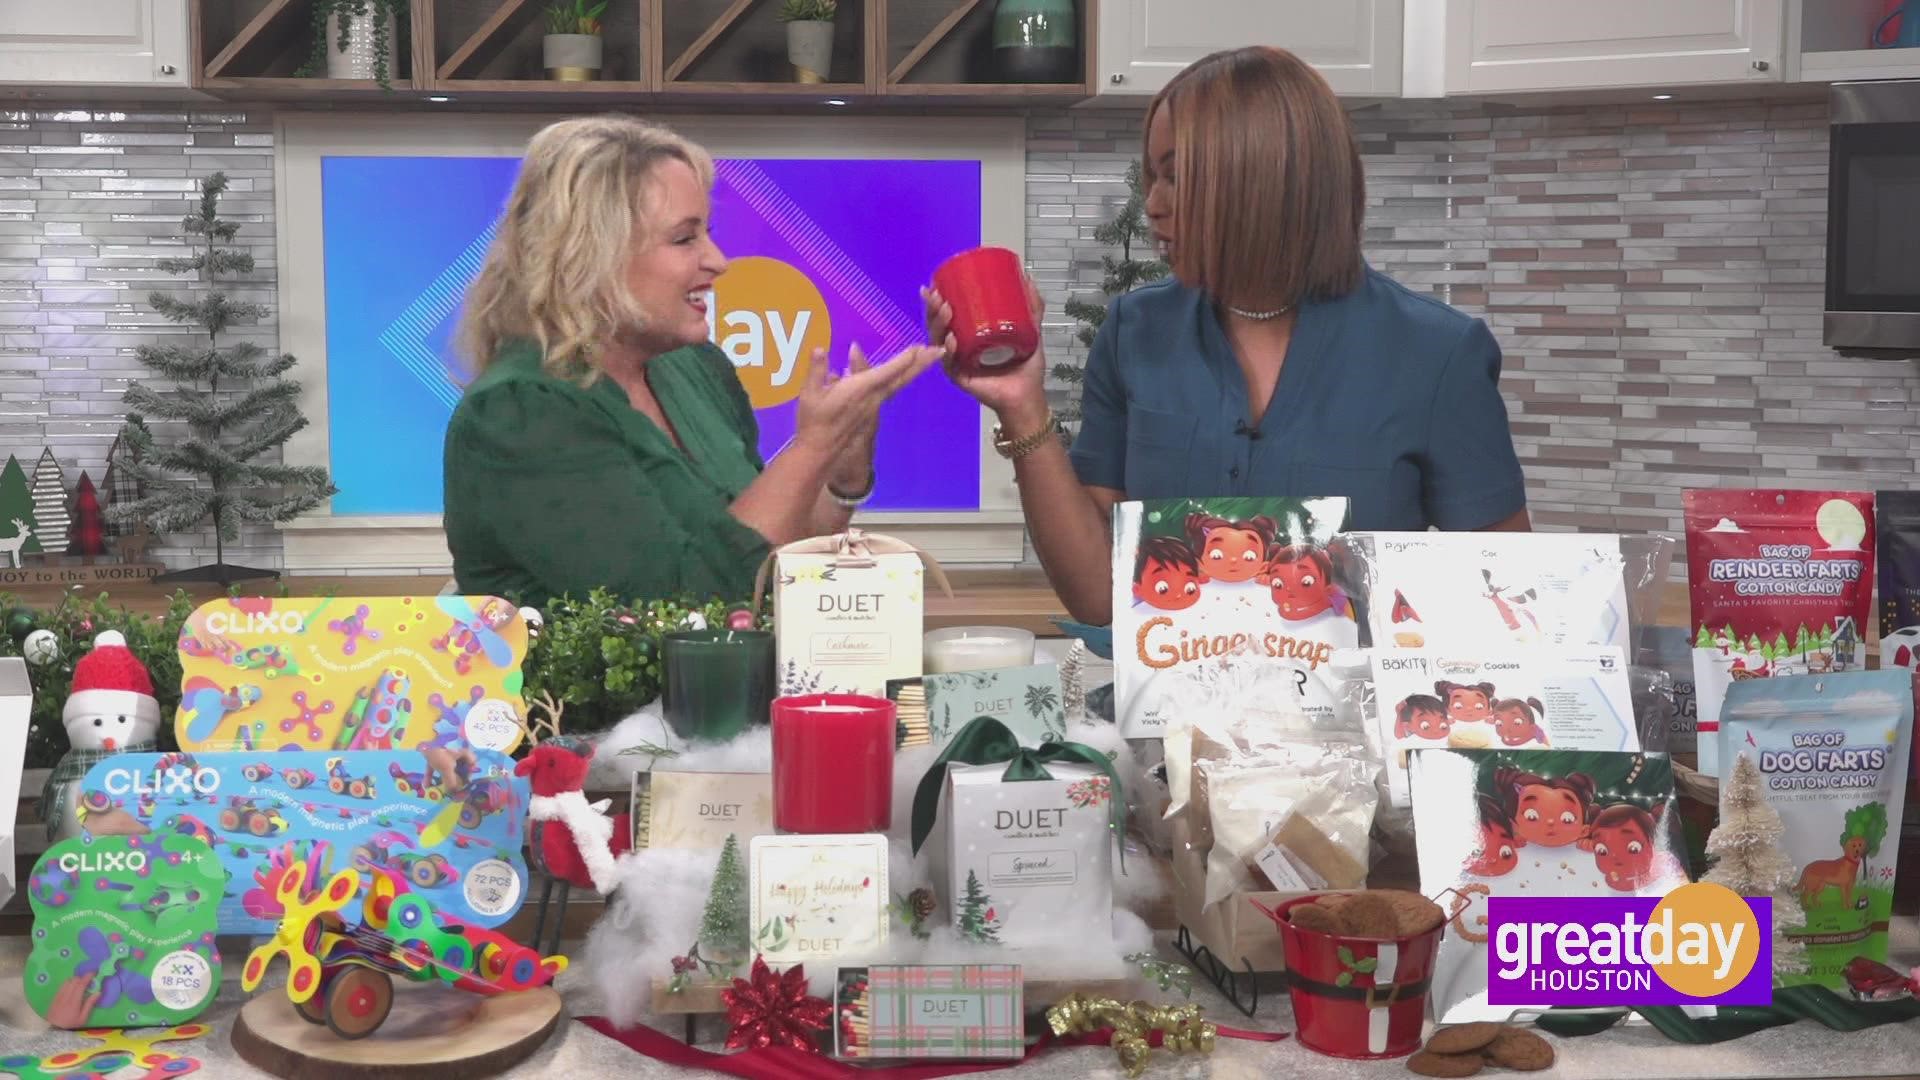 Lifestyle Advisor, Dawn McCarthy, shares what products are creating holiday buzz ahead of the gifting season.